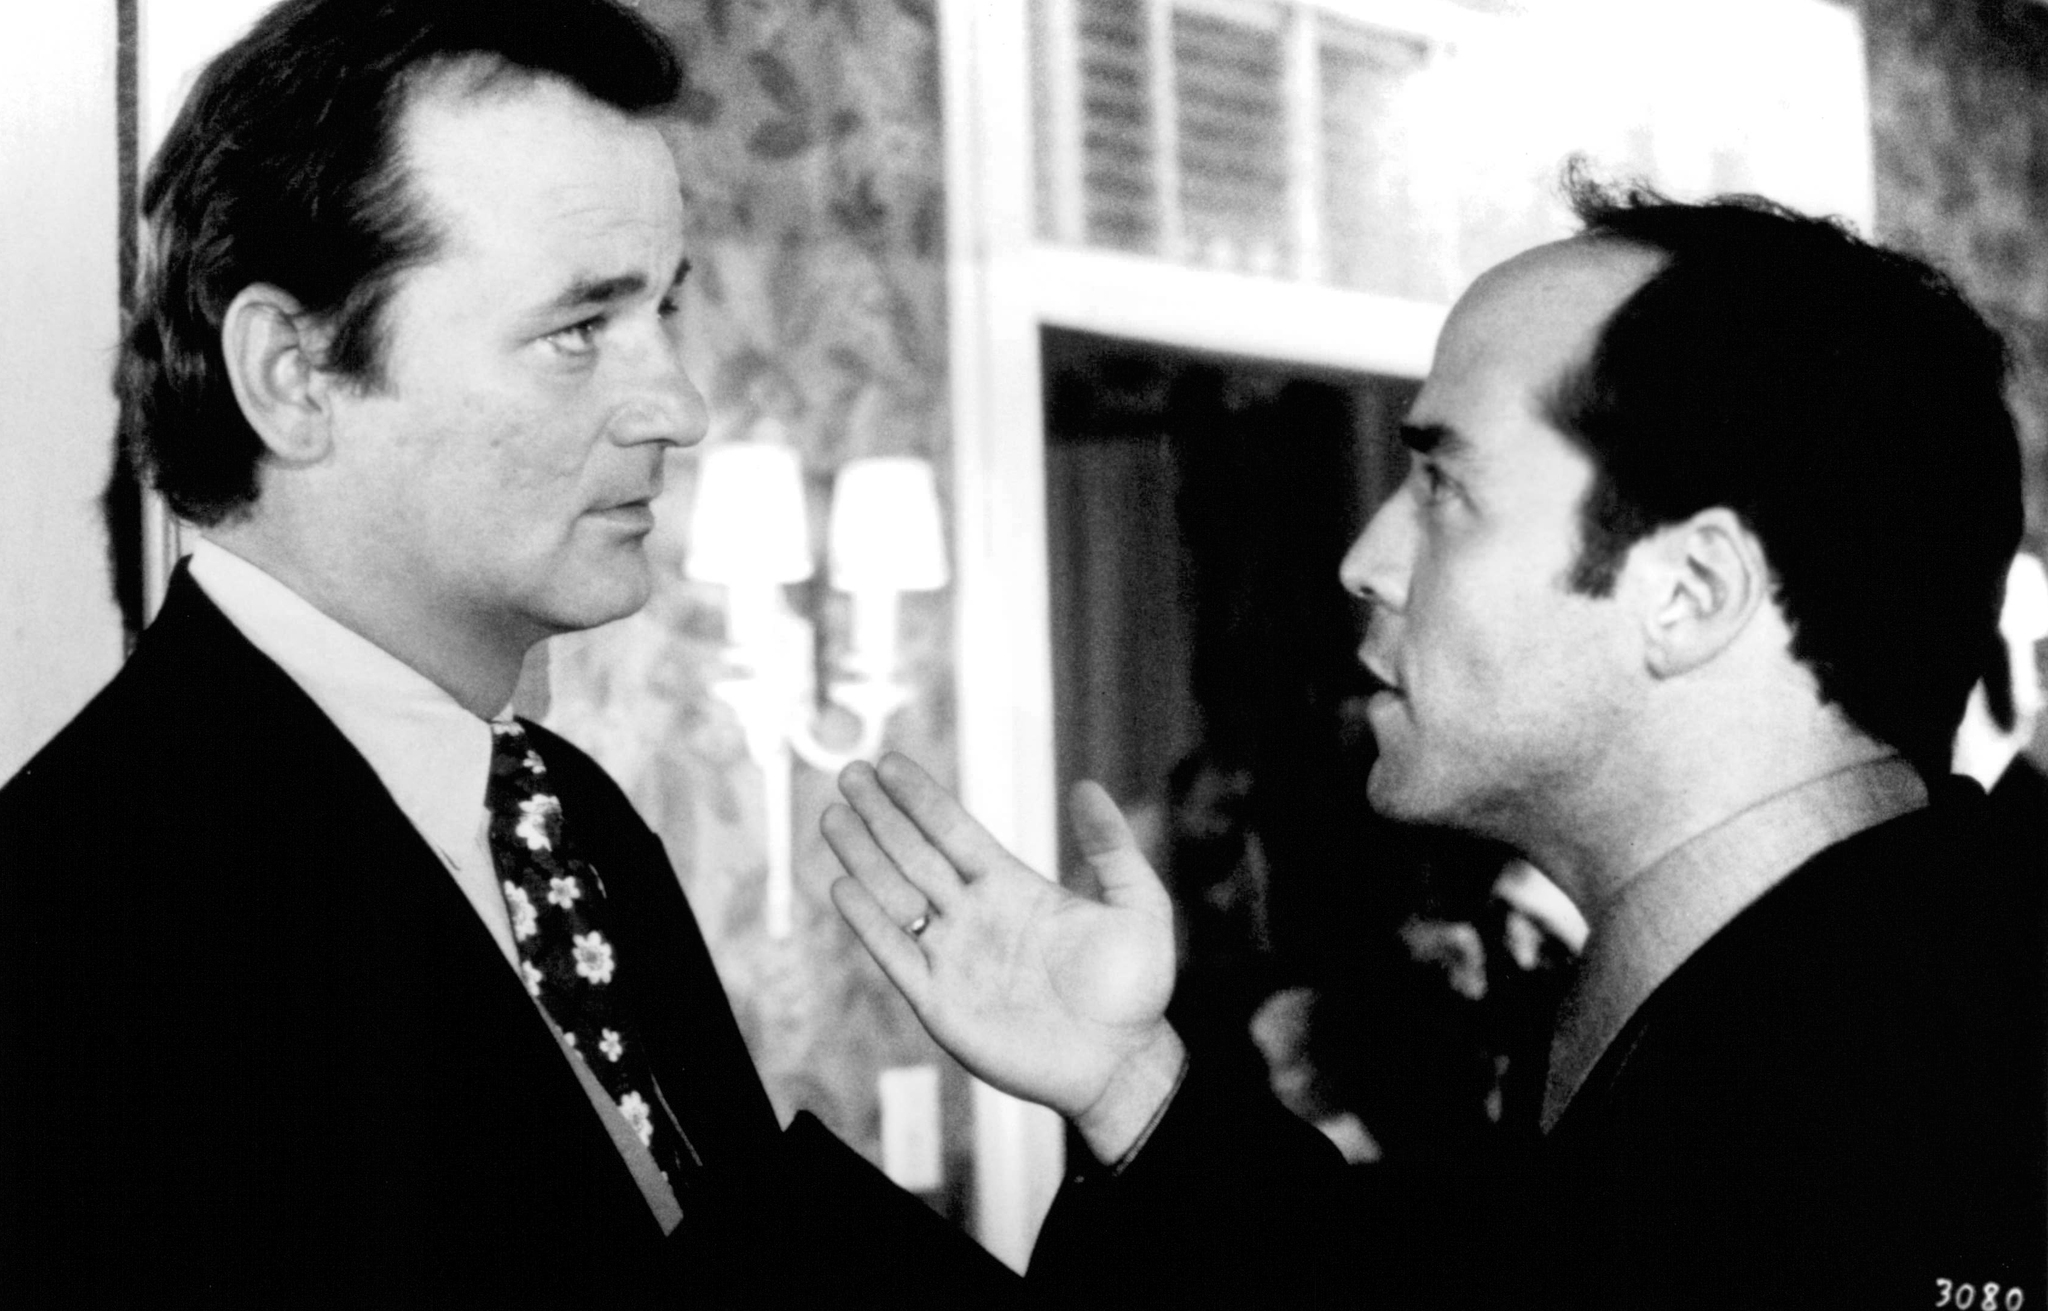 Still of Bill Murray and Jeremy Piven in Larger Than Life (1996)